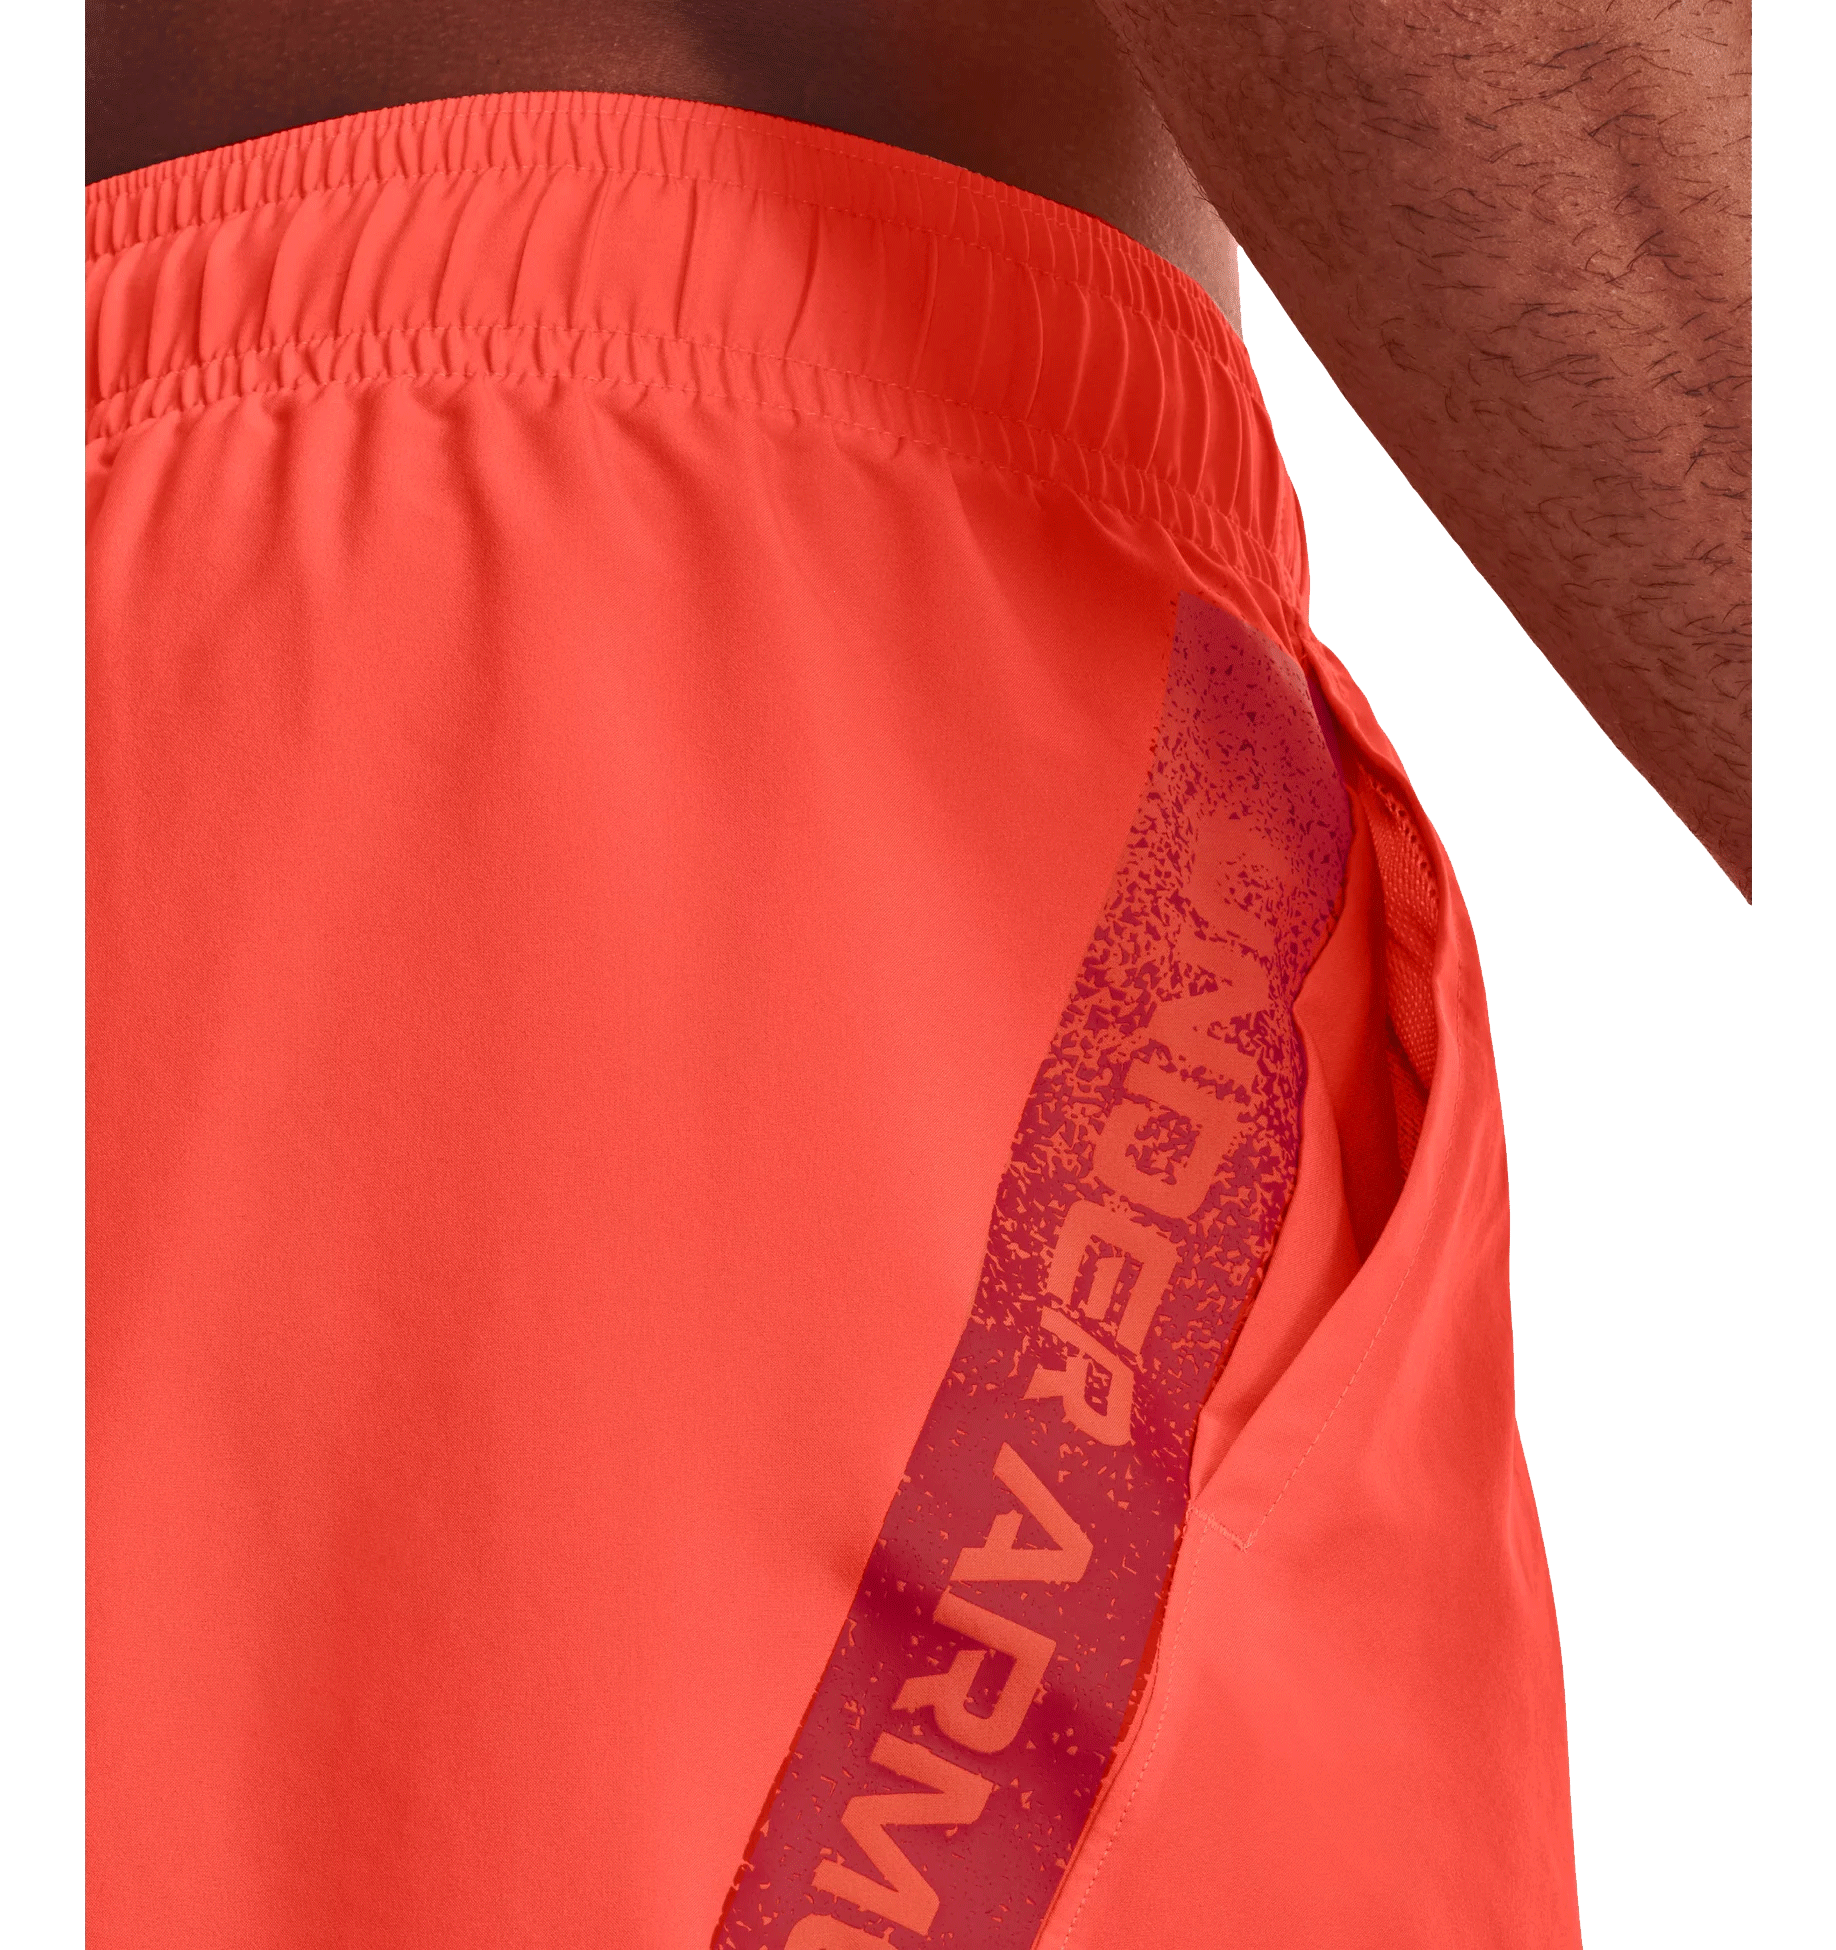 Under Armour Woven Graphic Shorts - Mens - After Burn/Chakra